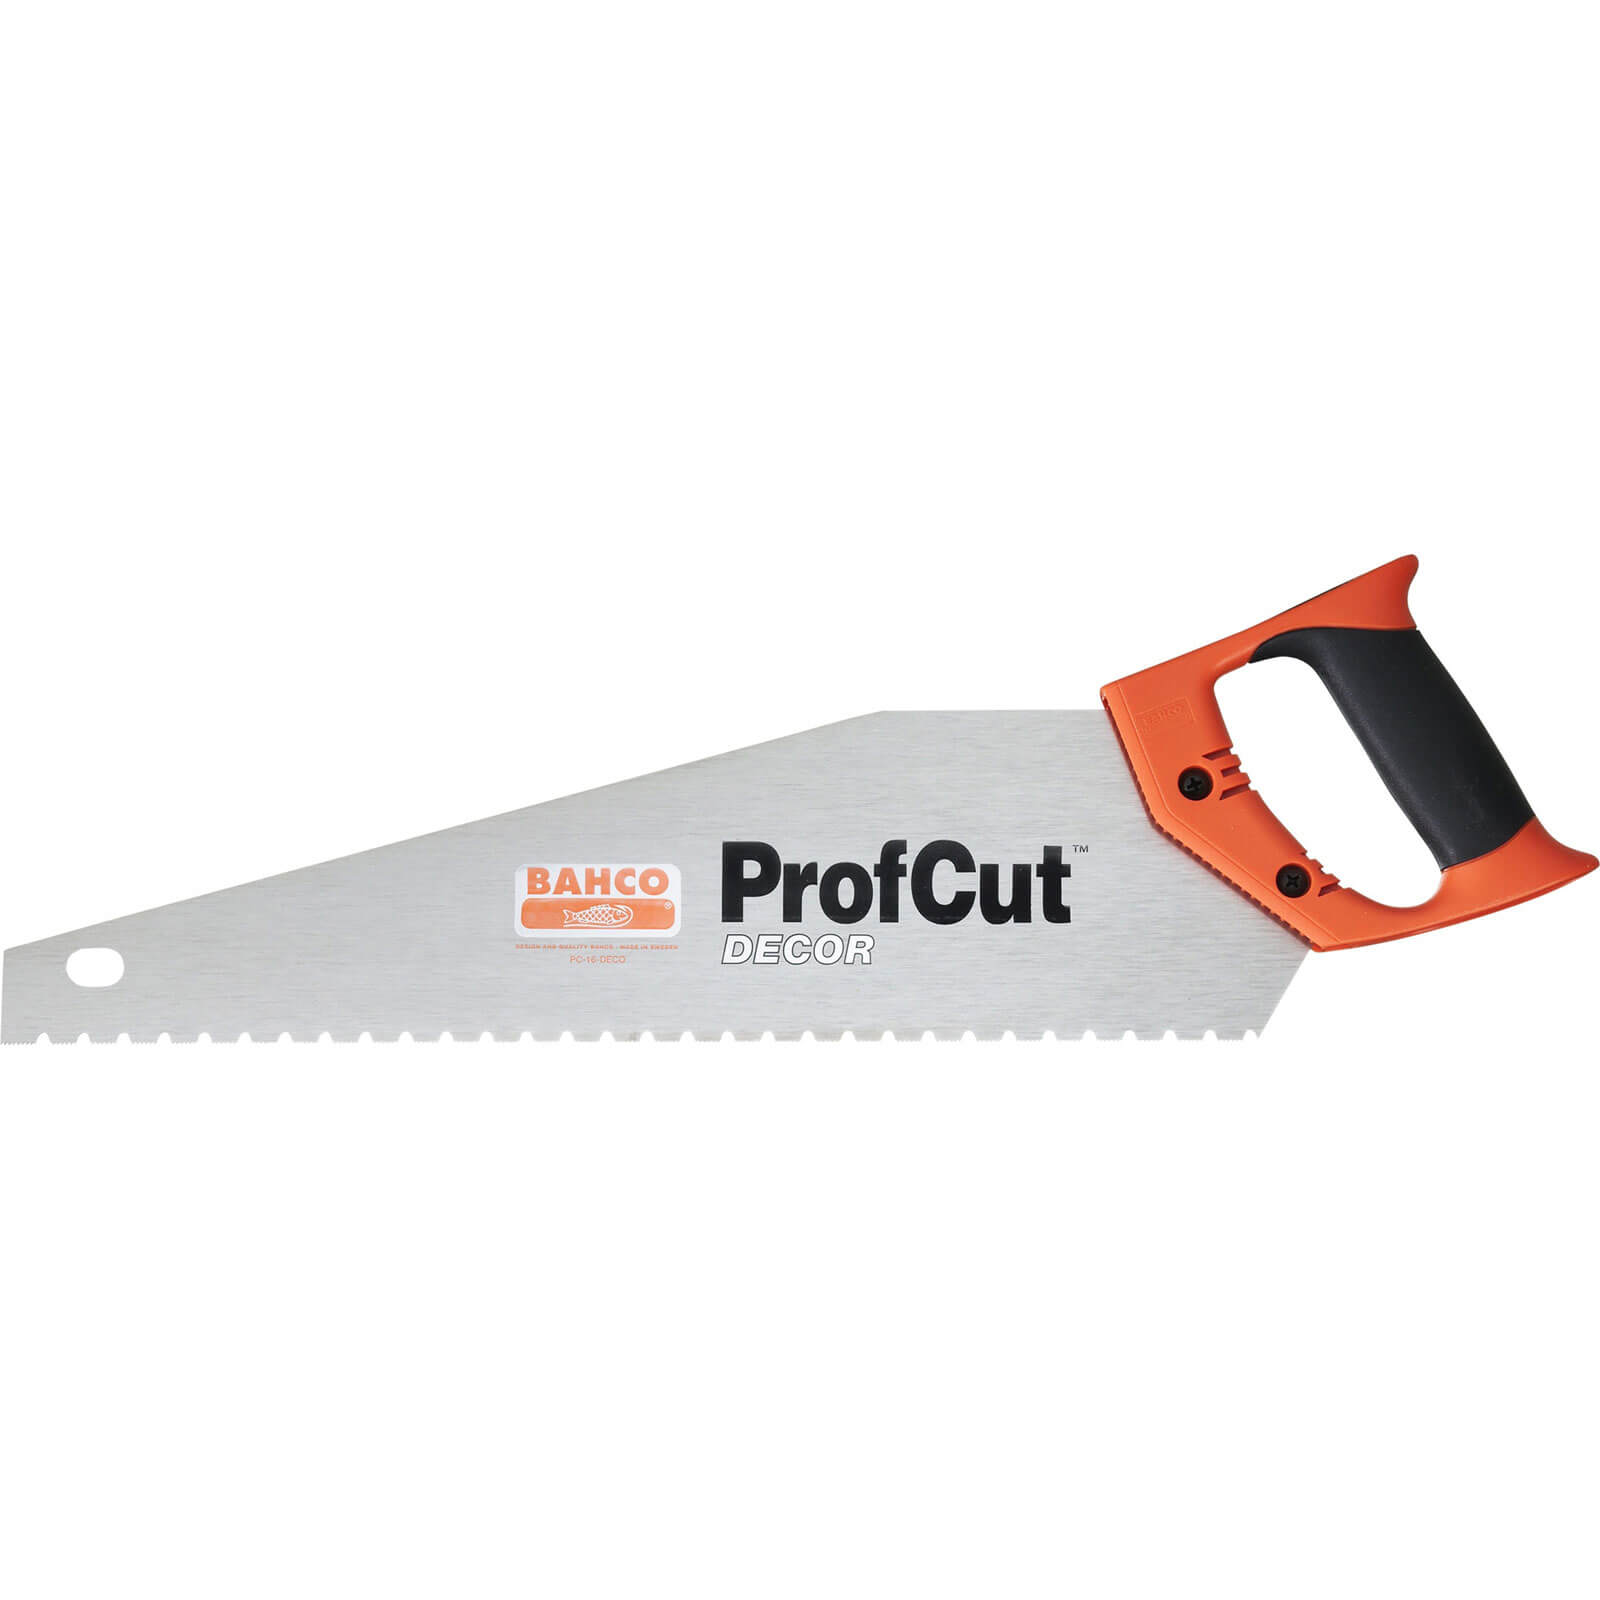 Image of Bahco ProfCut Hand Saw for Polystyrene Foam 16" / 400mm 18tpi